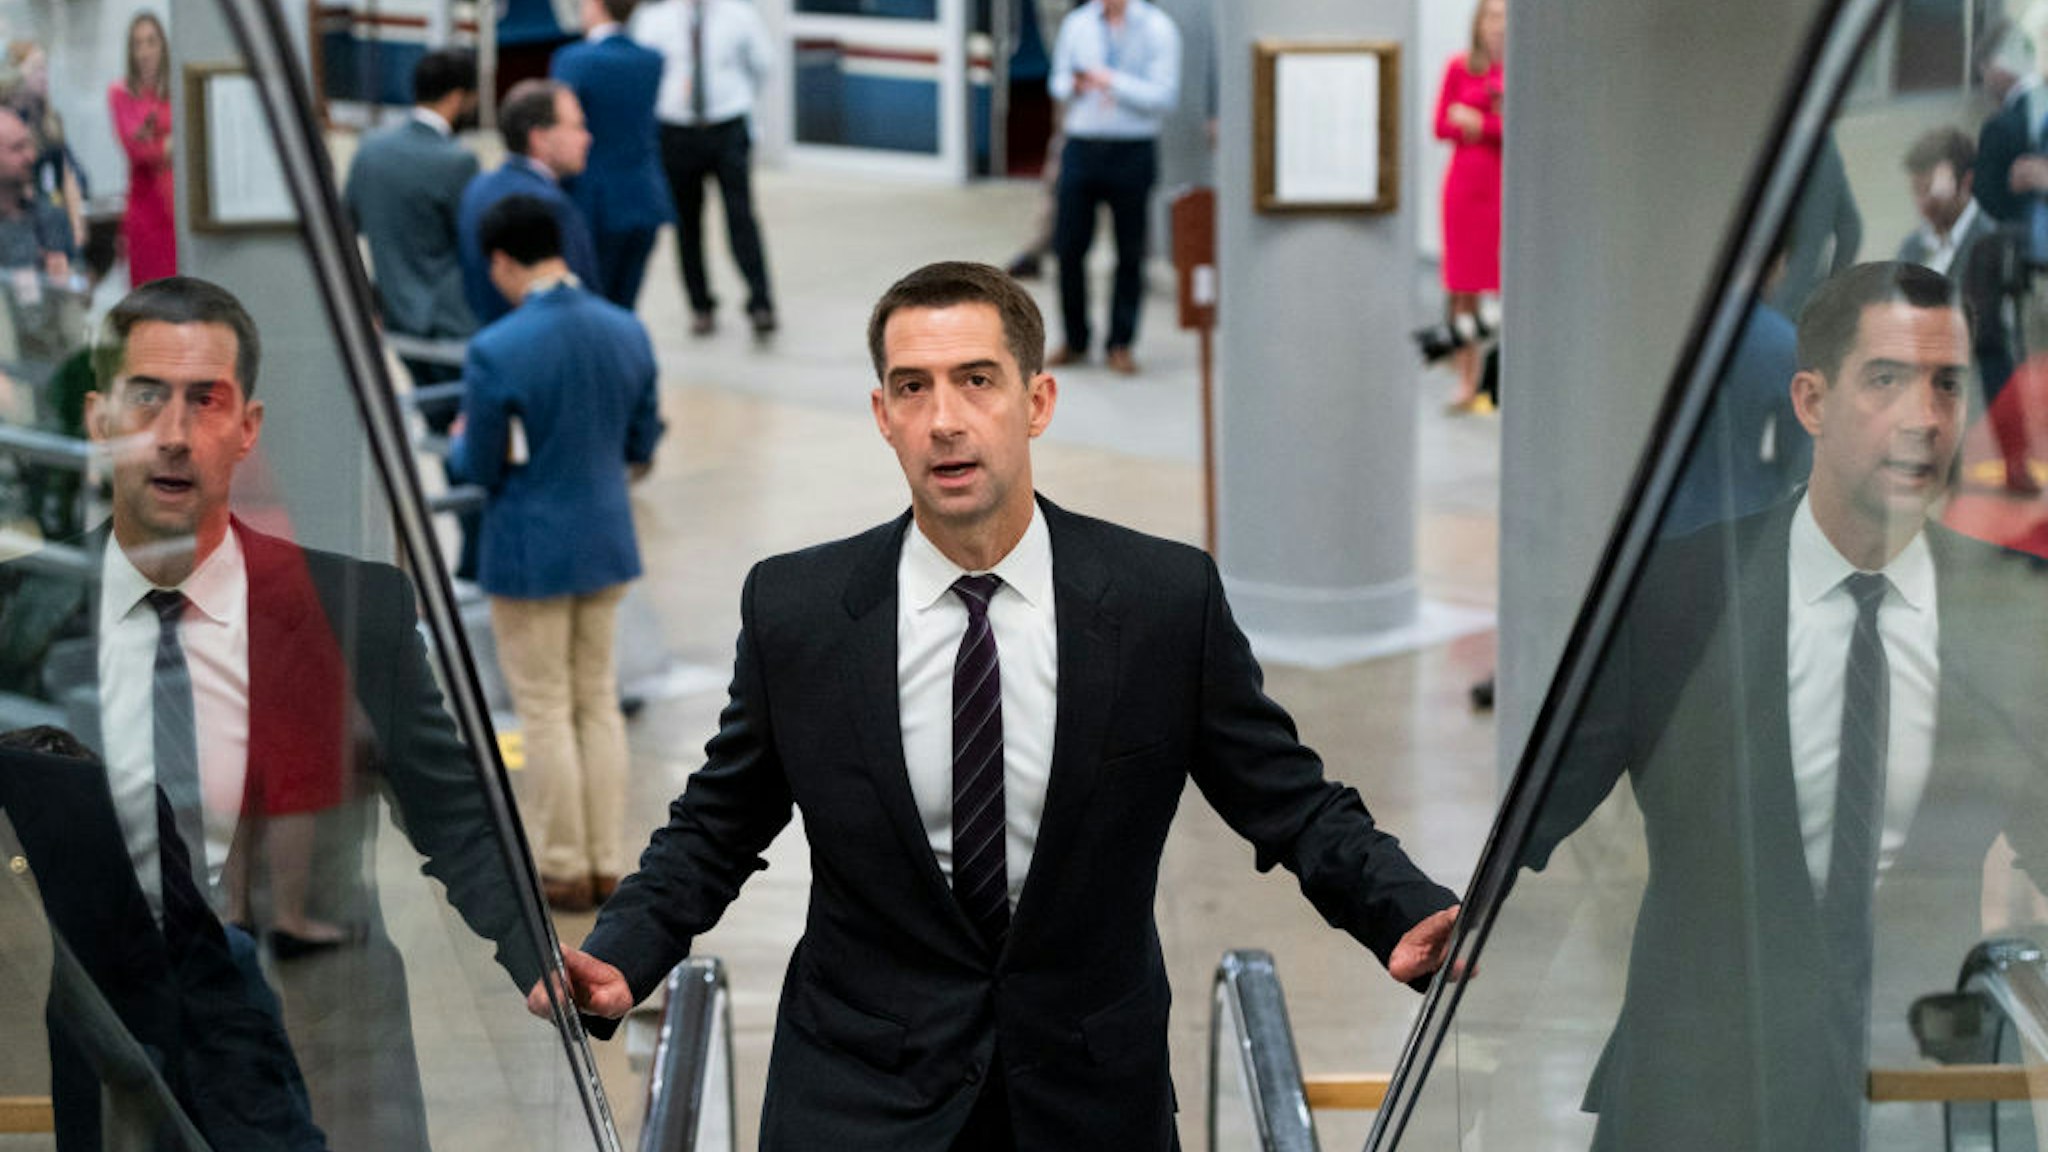 UNITED STATES - MAY 26: Sen. Tom Cotton, R-Ark., arrives for a vote in the U.S. Capitol on Wednesday, May 26, 2021. (Photo by Bill Clark/CQ-Roll Call, Inc via Getty Images)